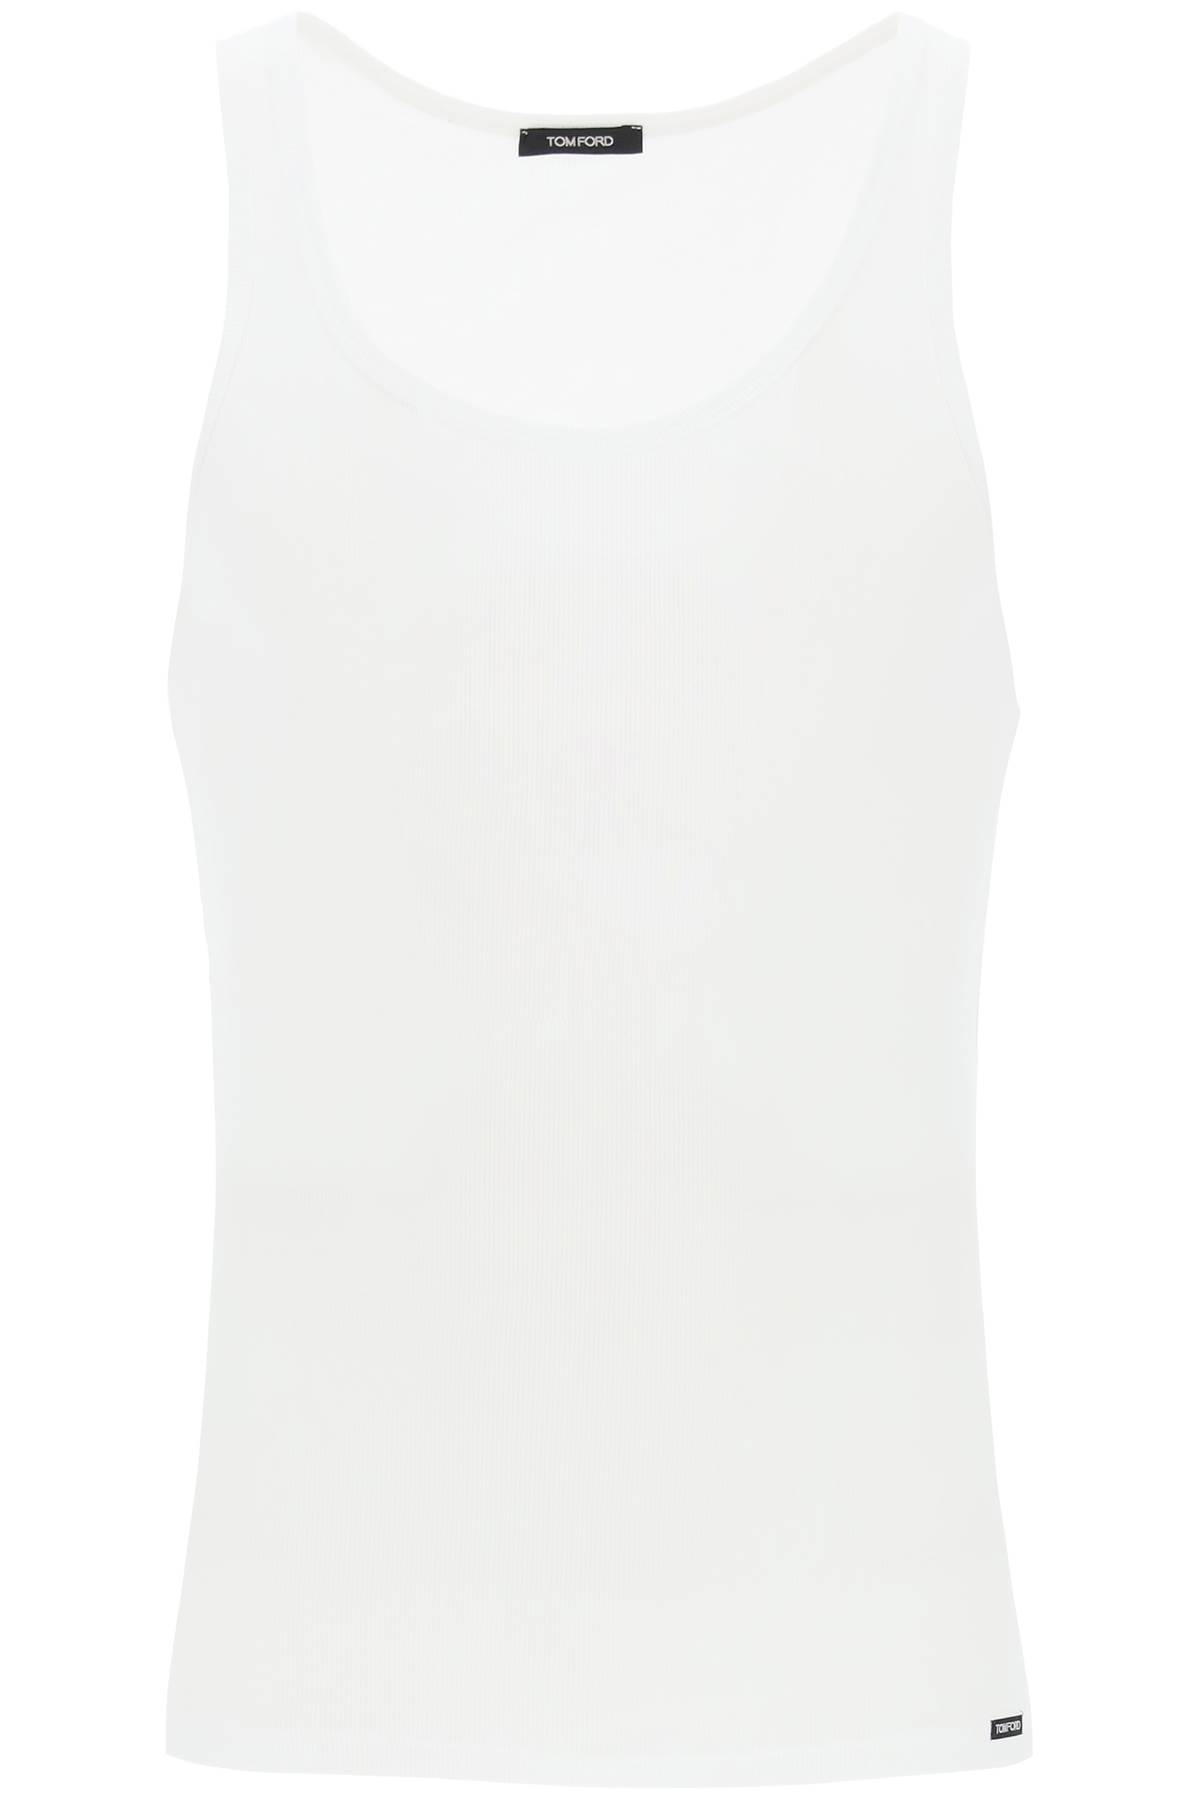 Tom Ford TOM FORD ribbed underwear tank top